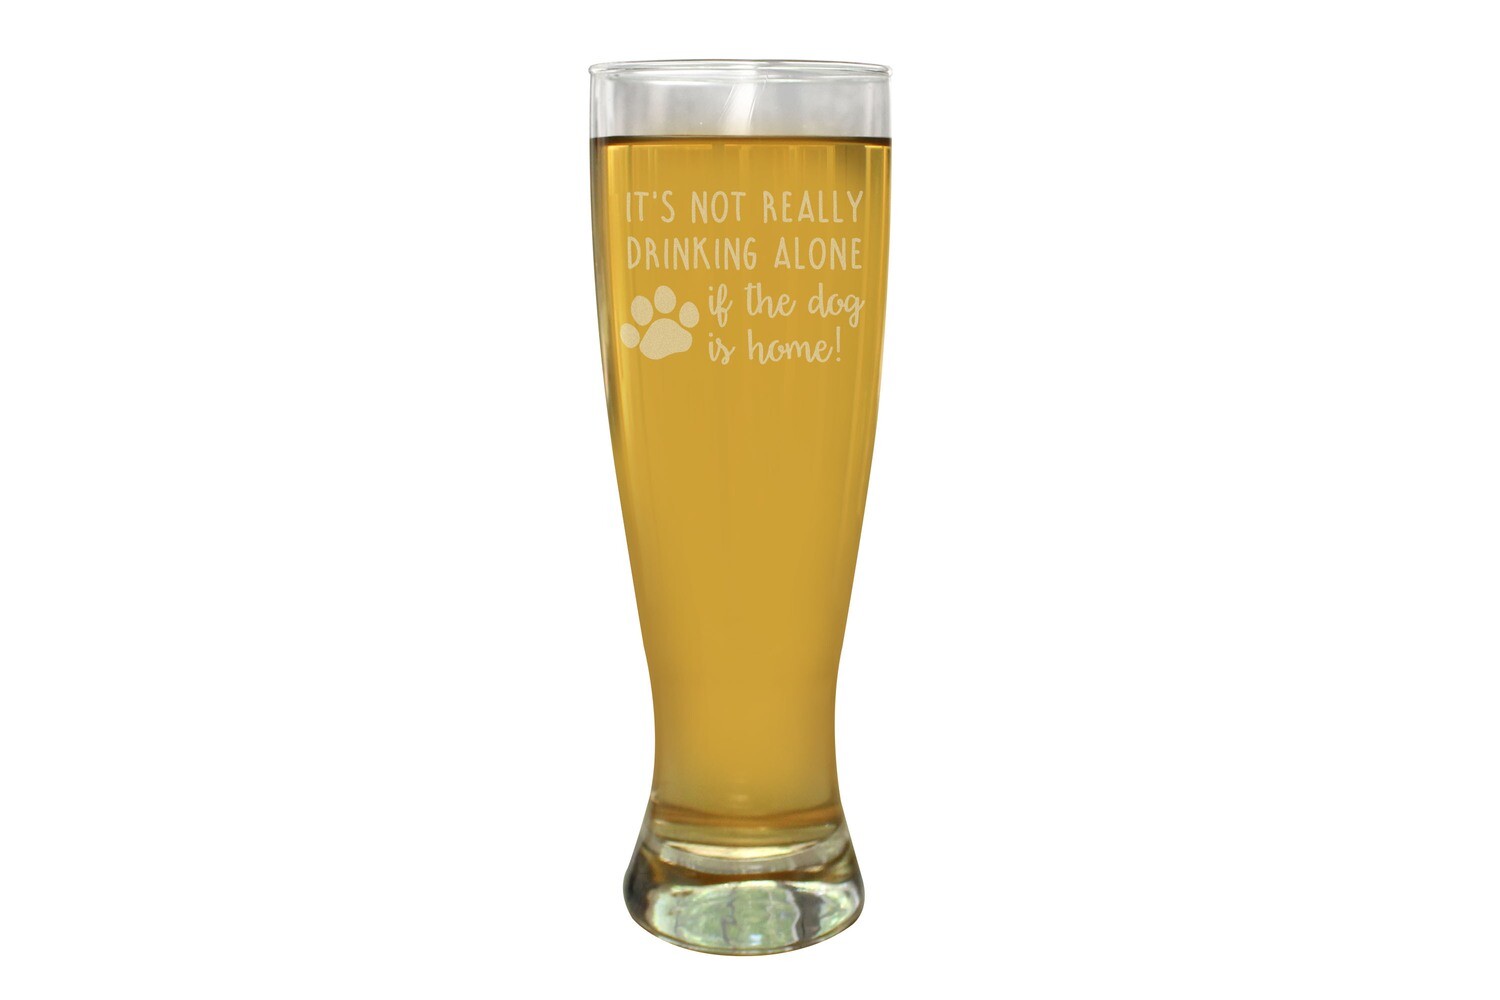 It's not really drinking alone if the dog is home Pilsner Beer Glass 16 oz